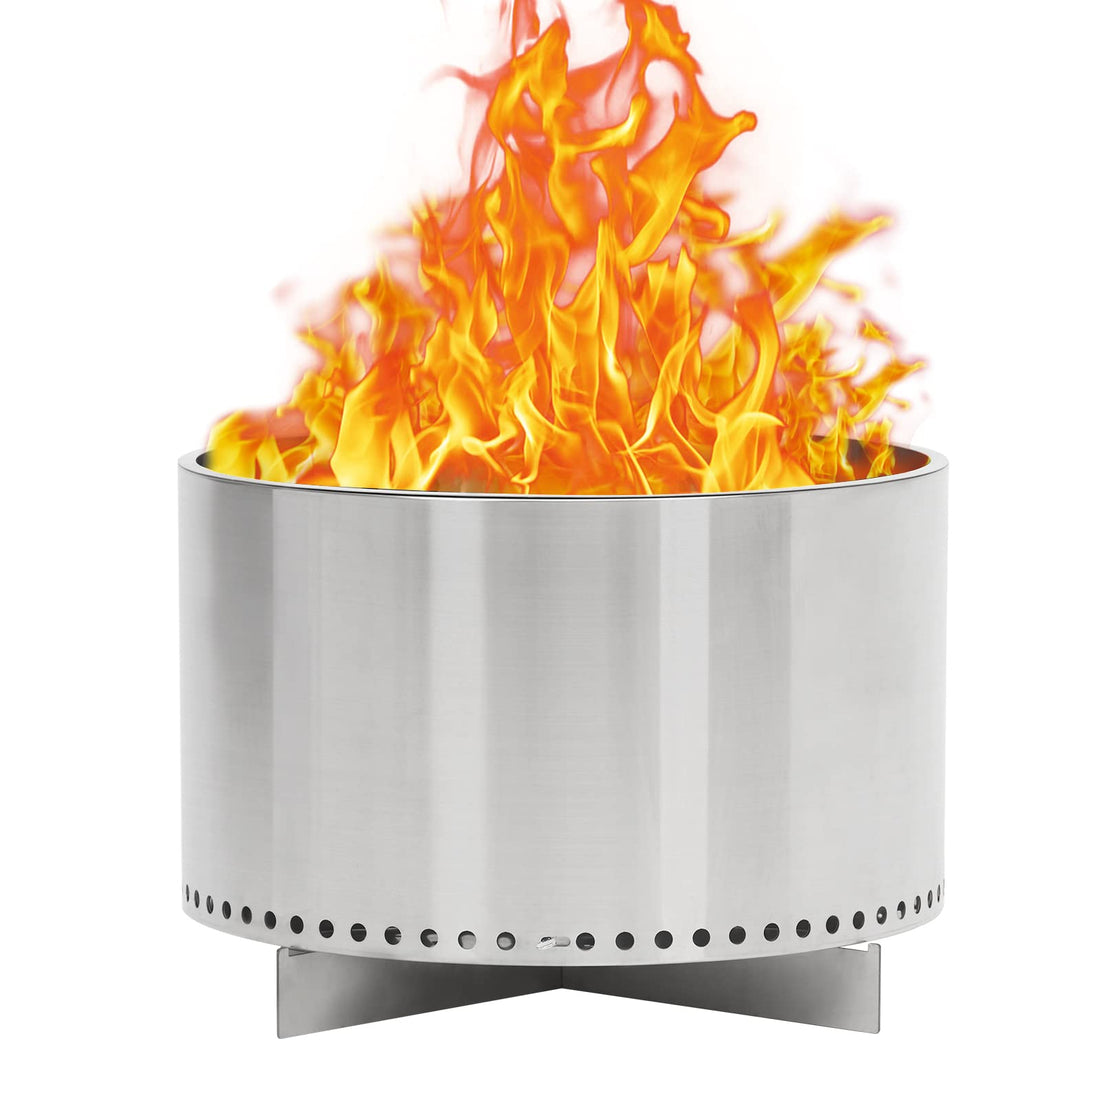 20.5 Inch Smokeless Fire Pit For Outdoor Wood Burning Without Handle Portable Stainless Steel Camping Stove